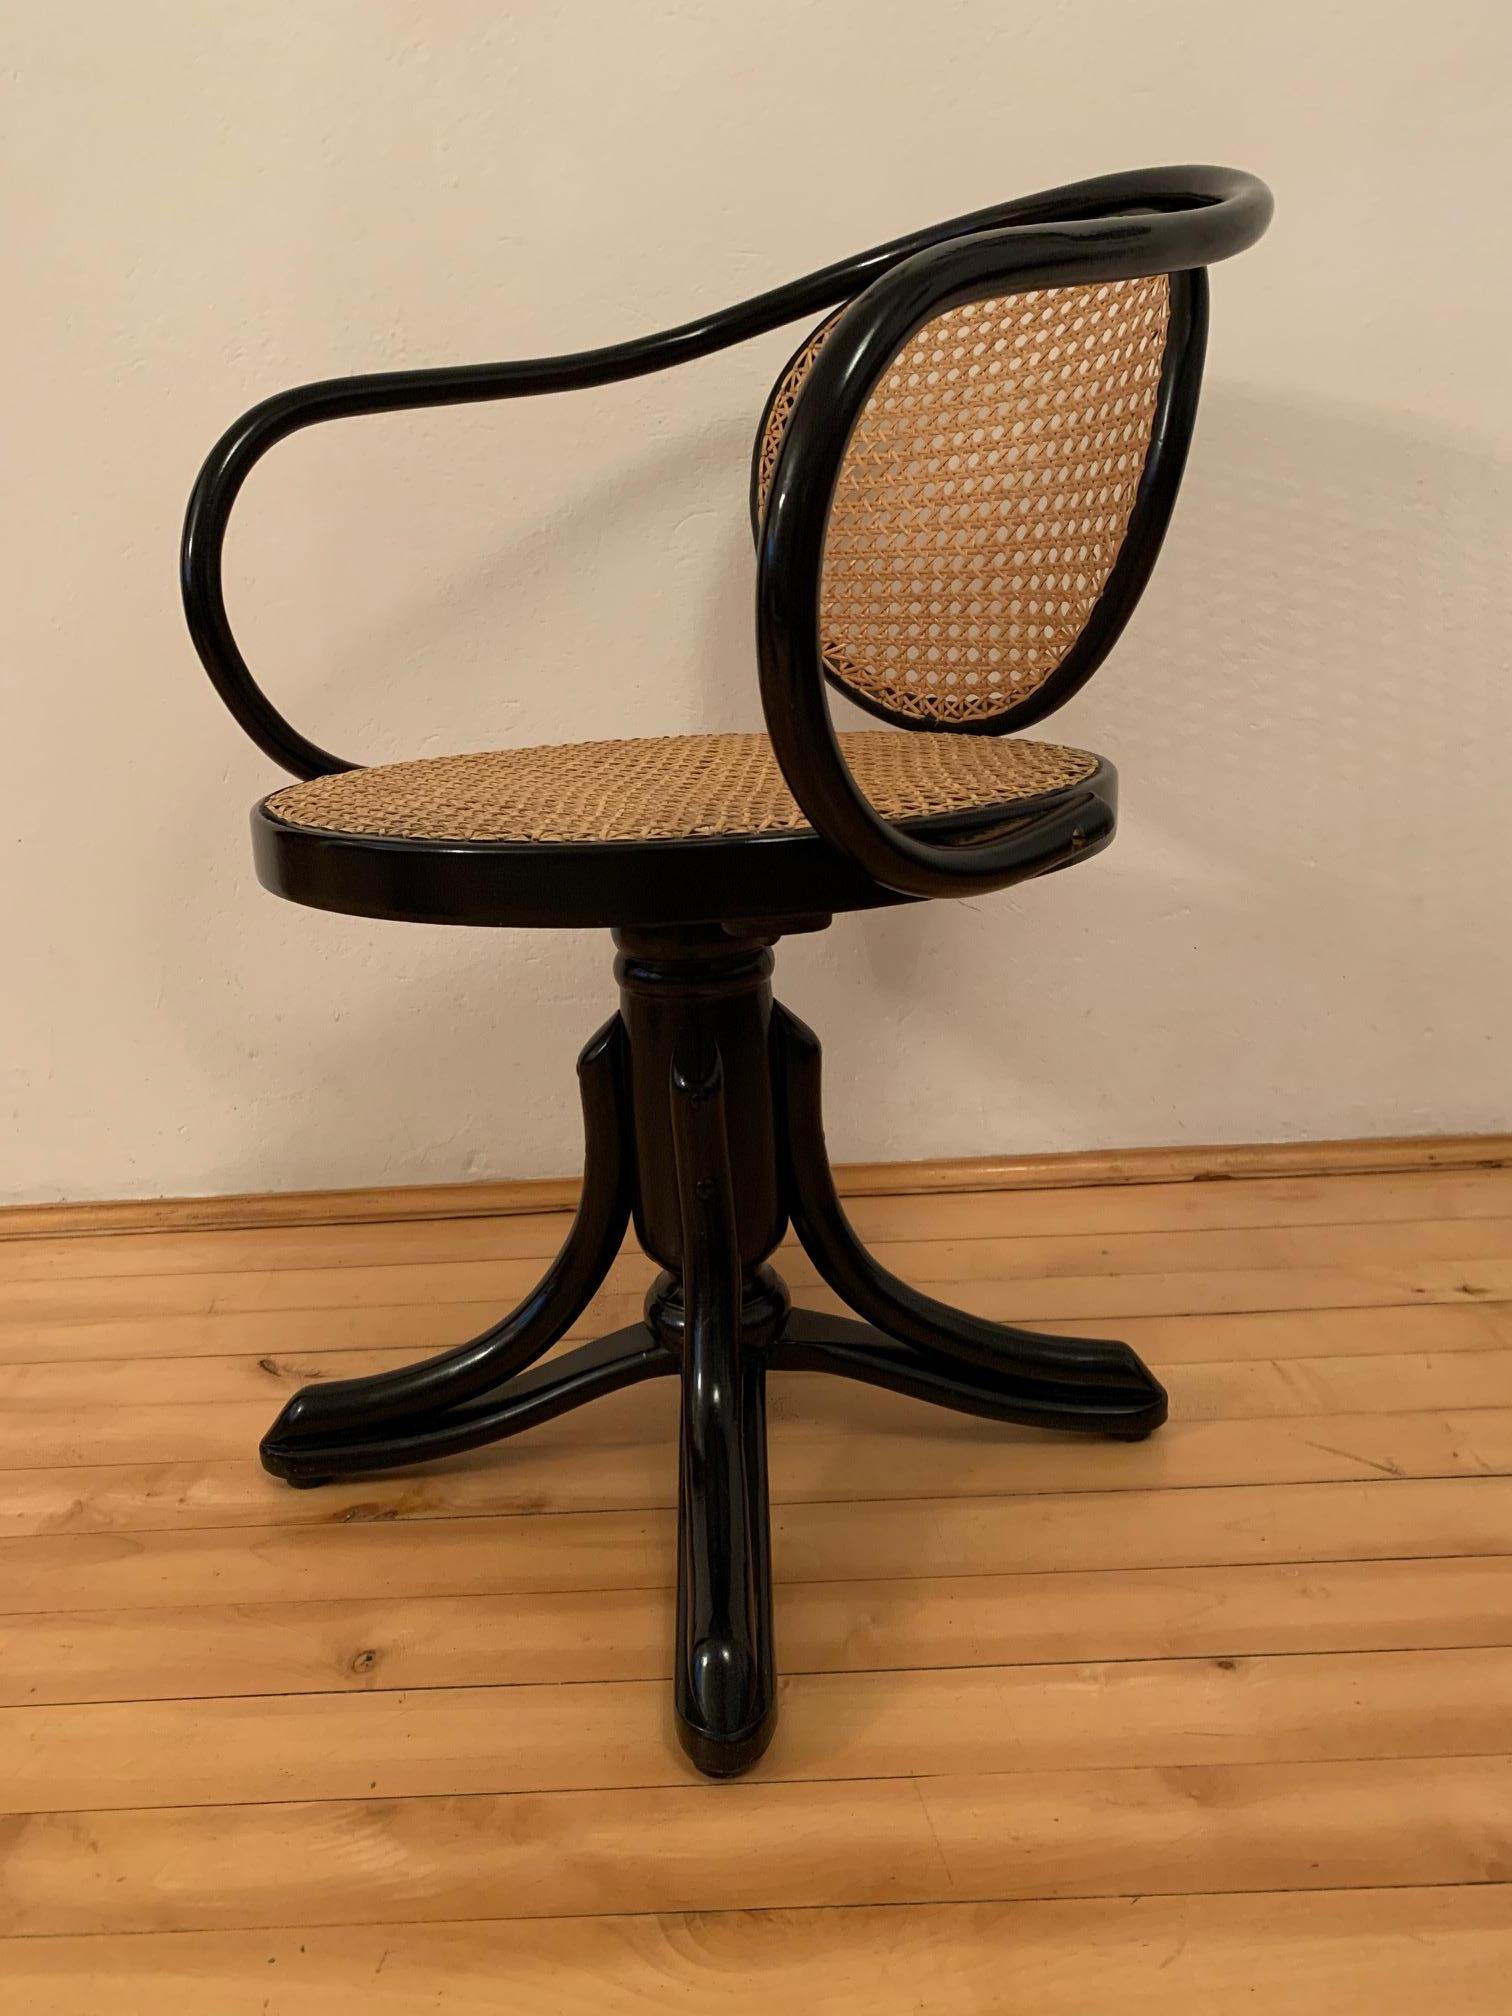 Thonet chair, ZPM Radomsko, Bentwood model 5501. Design from 1900-1920. Armchair completely original, without renovation. Very good condition. Excellent performance bent wood, cast iron, raffia and brass screws. The Bentwood chair model 5501 is one